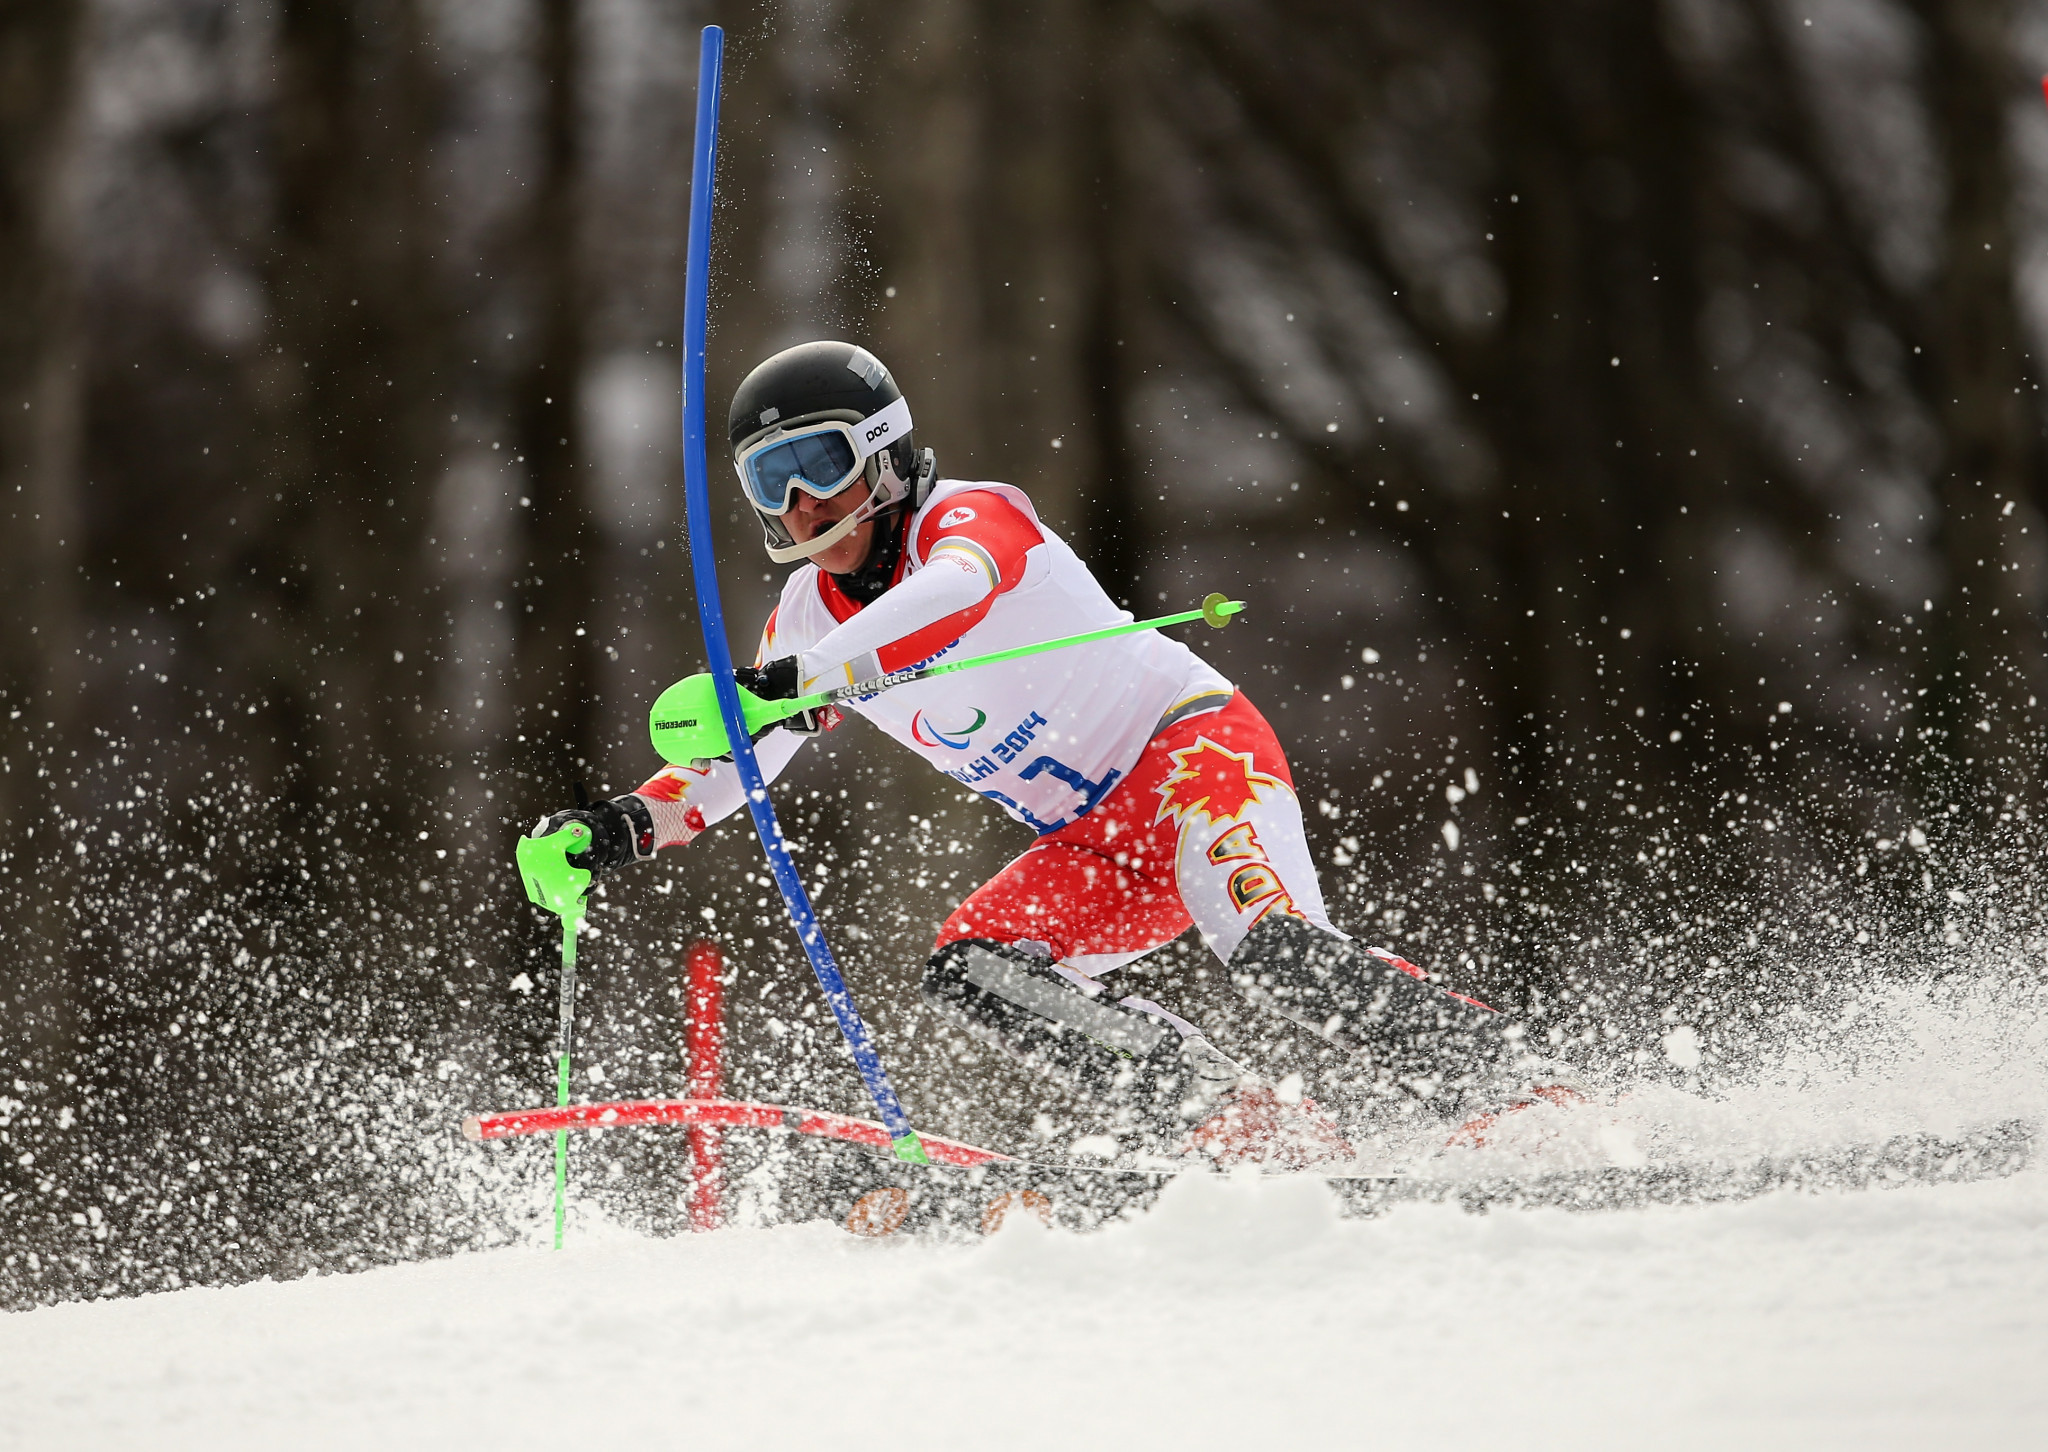 Marcoux dominates downhill courses on home snow at World Para Alpine Skiing World Cup in Kimberley